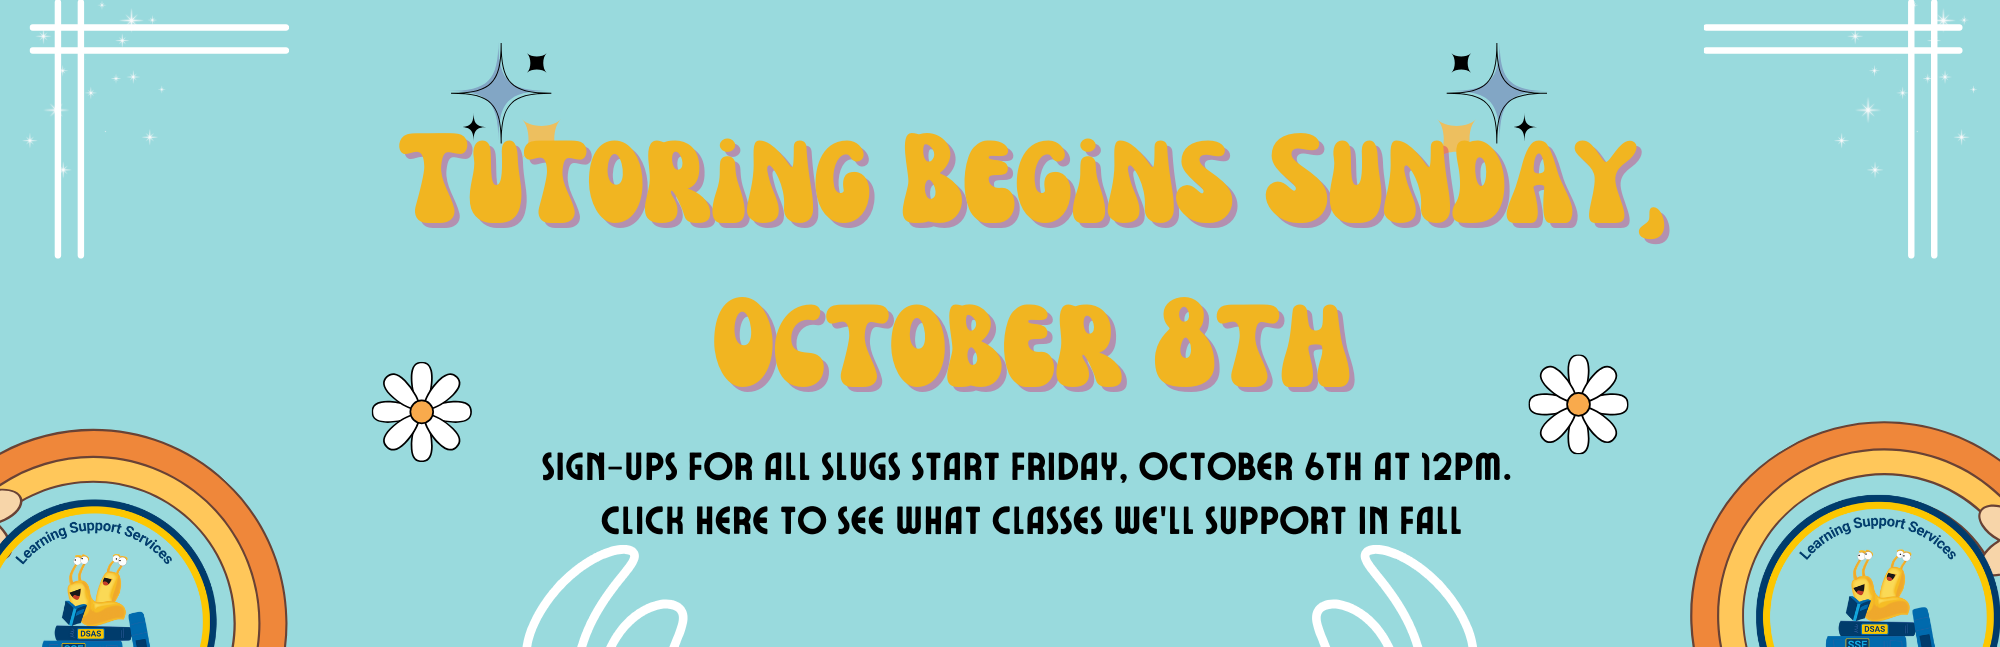 Blue banner that states that tutoring begins Sunday, October 8th and that sign-ups for tutoring begin Friday October 6th at 12pm